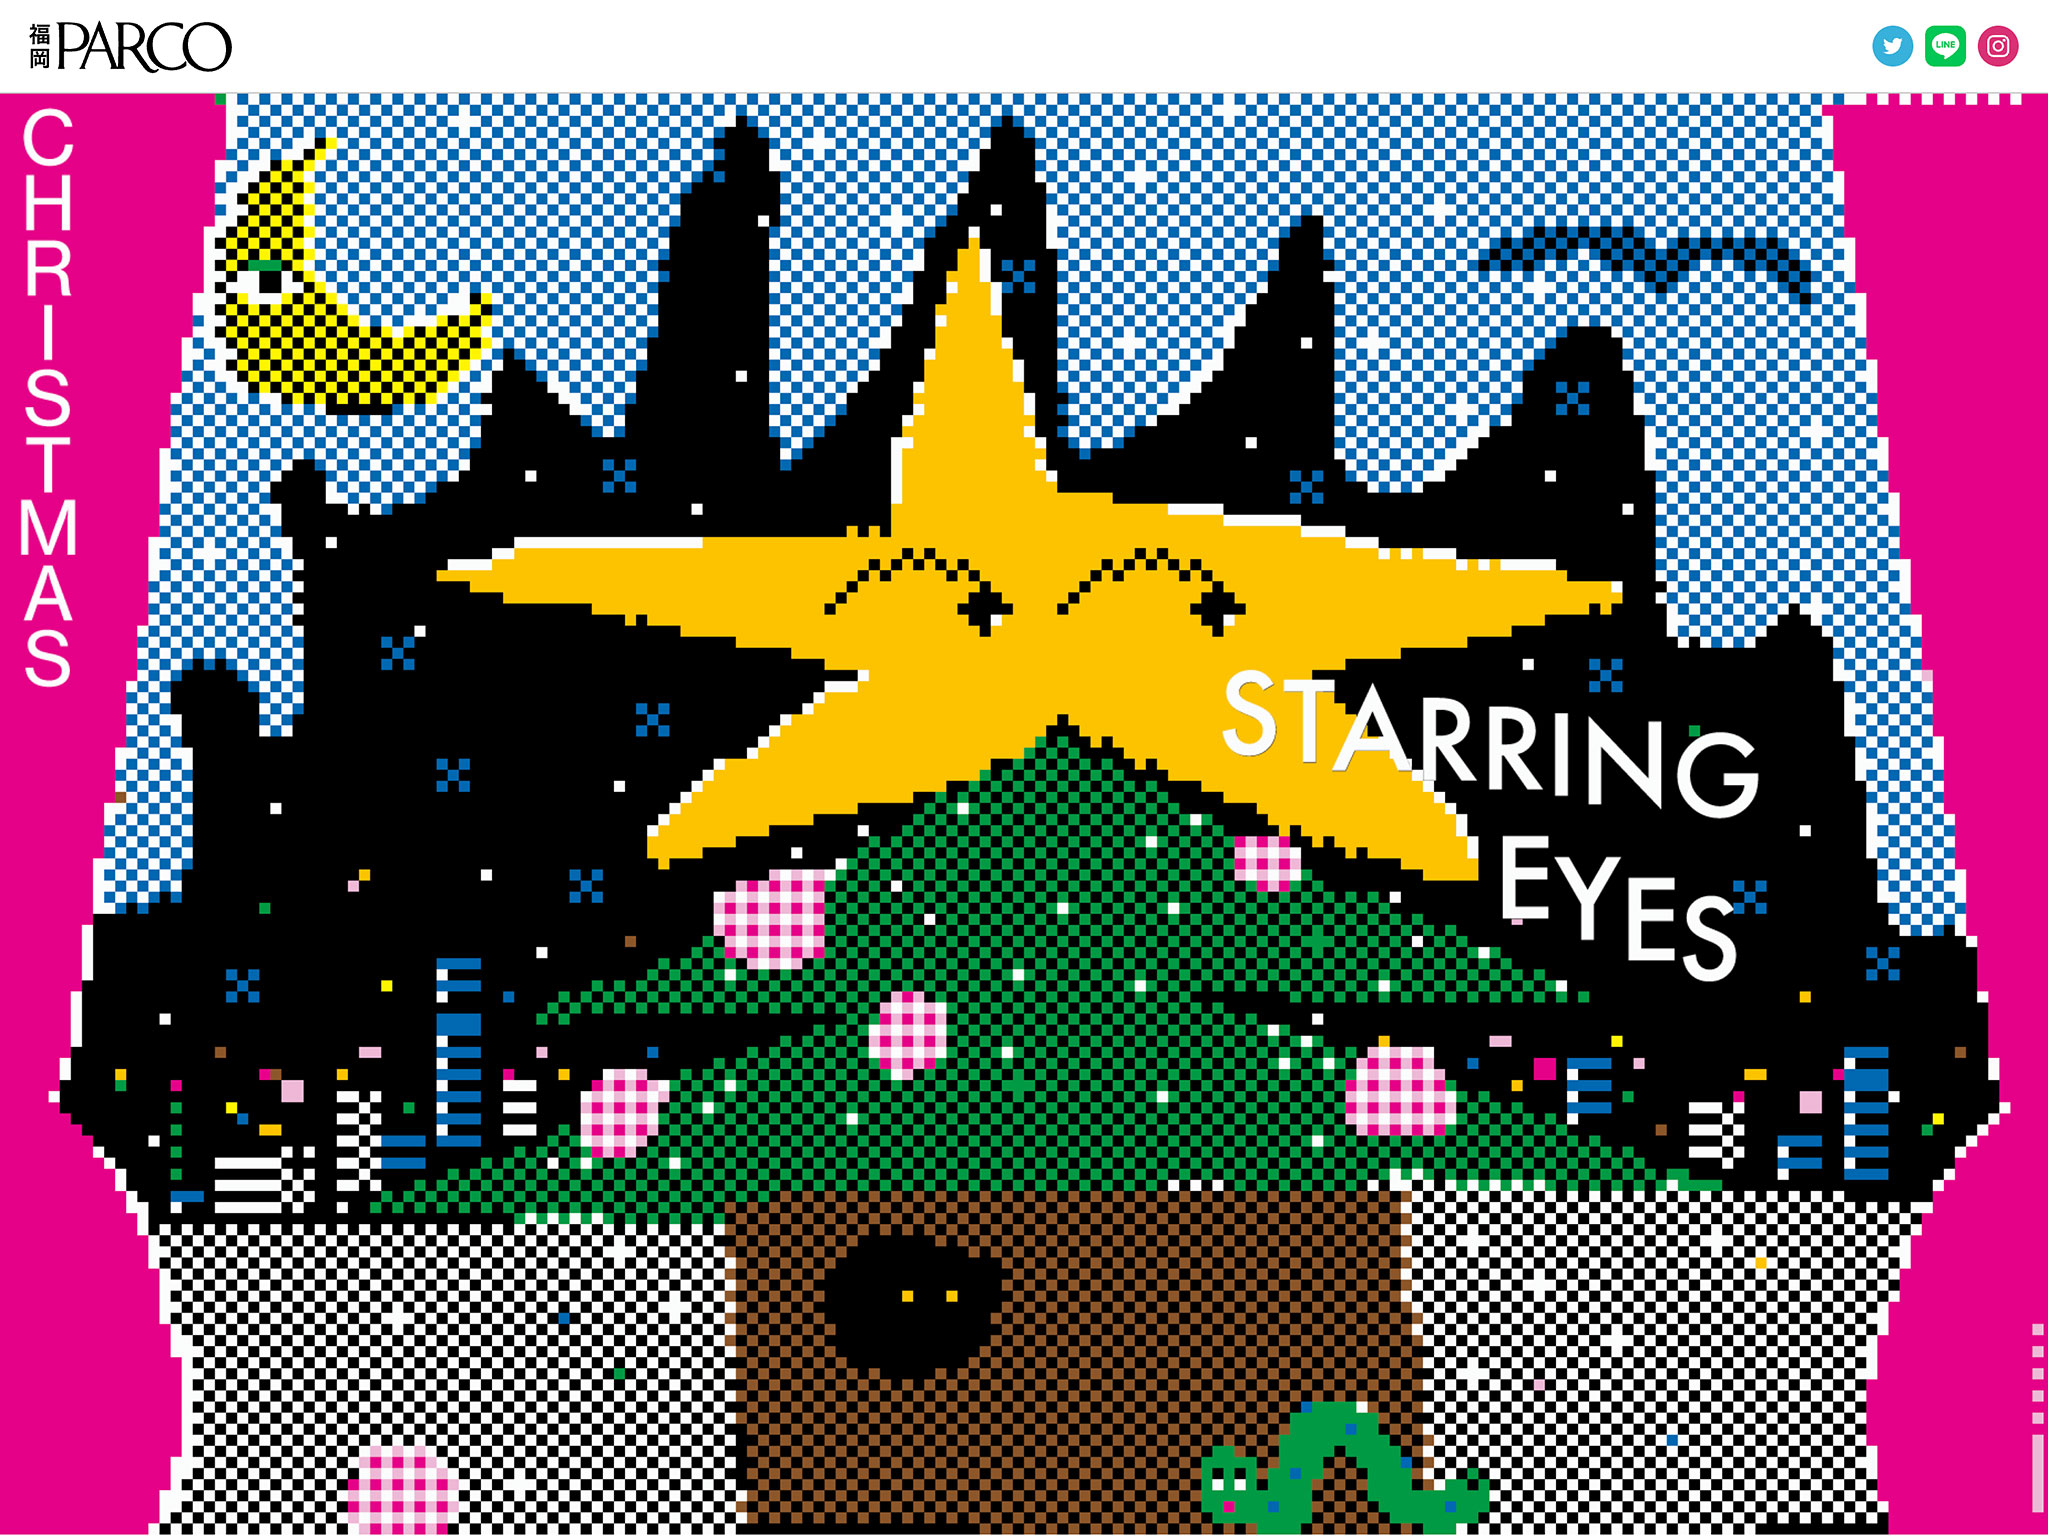 STARRING EYES PARCO CHRISTMAS｜福岡PARCO